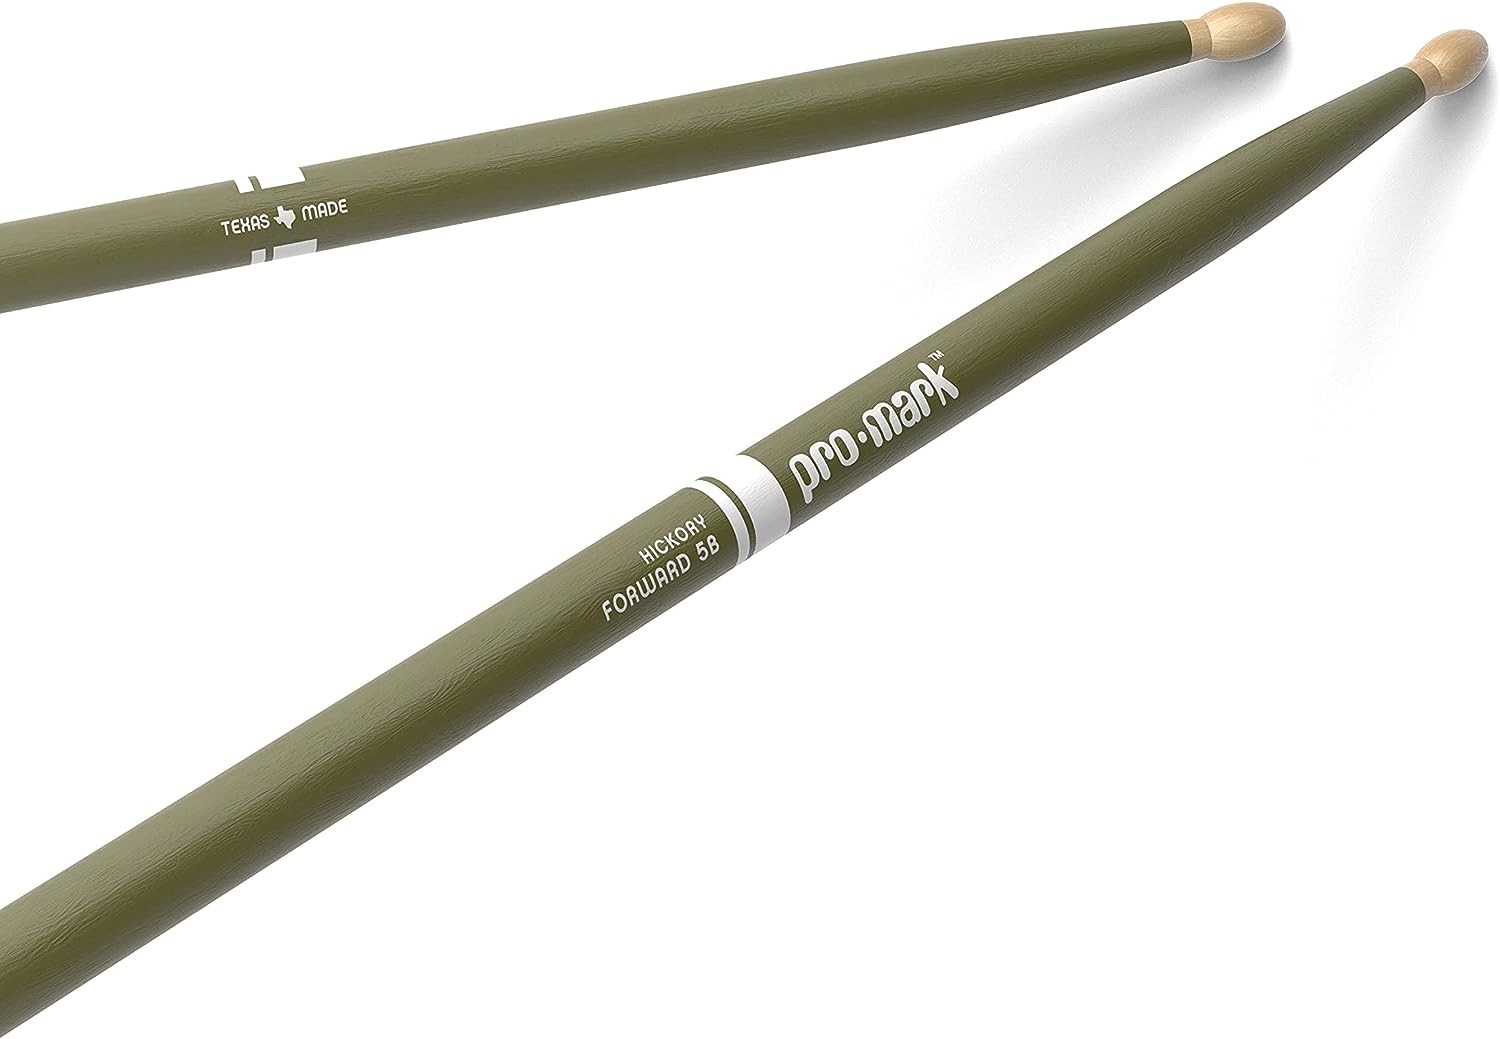 Promark American Hickory Classic 5B Drumsticks, Painted Green